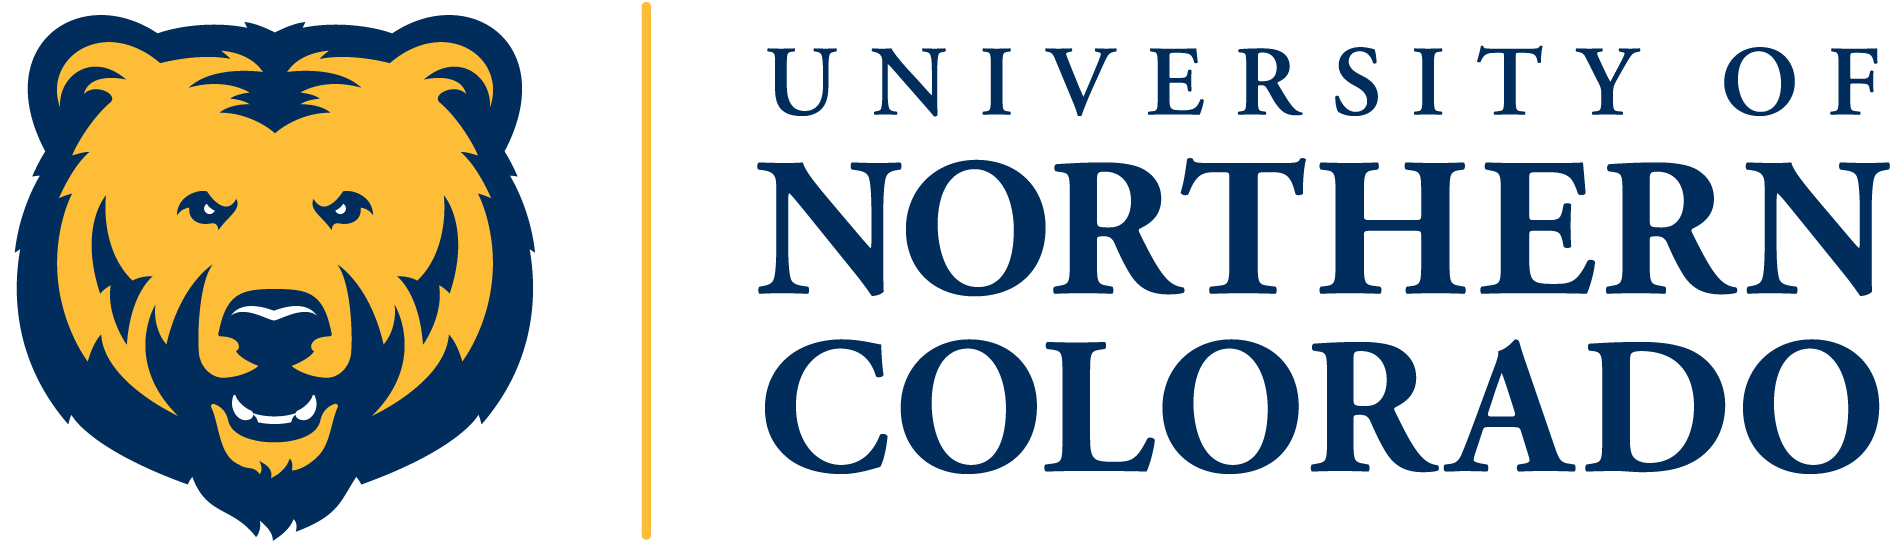 a logo for the university of northern colorado